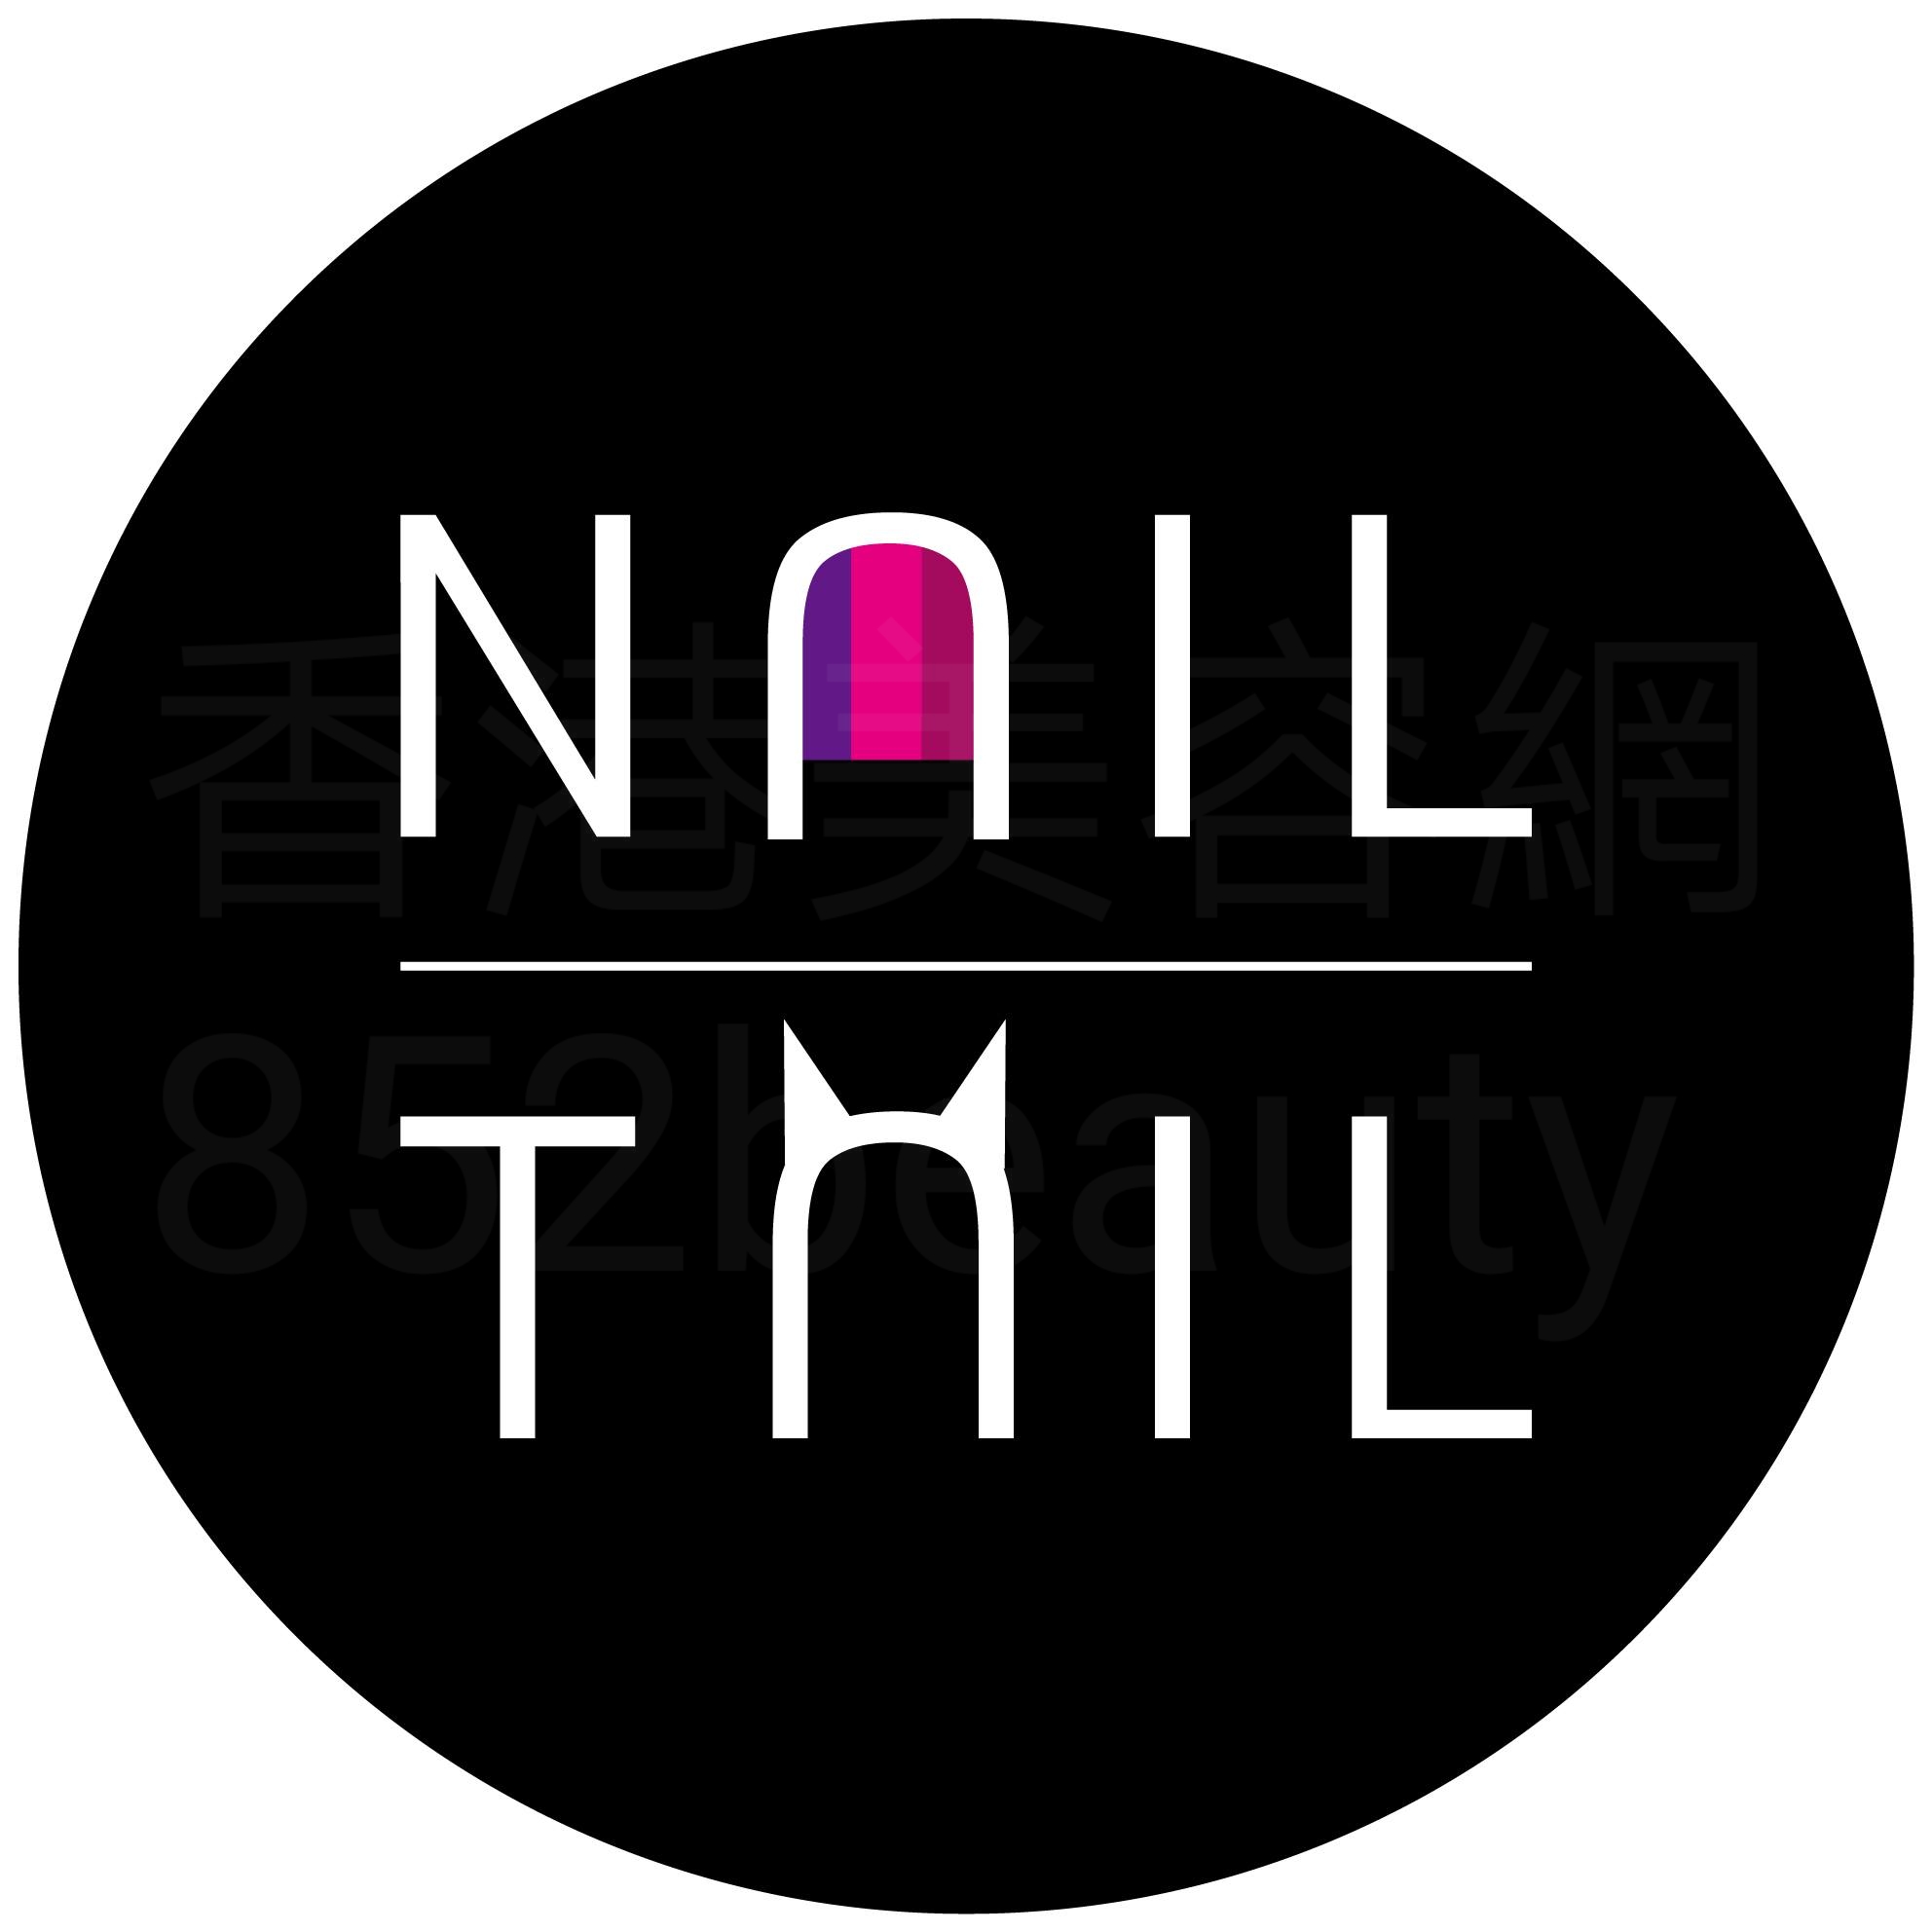 Hand and foot care: NAIL & TAIL